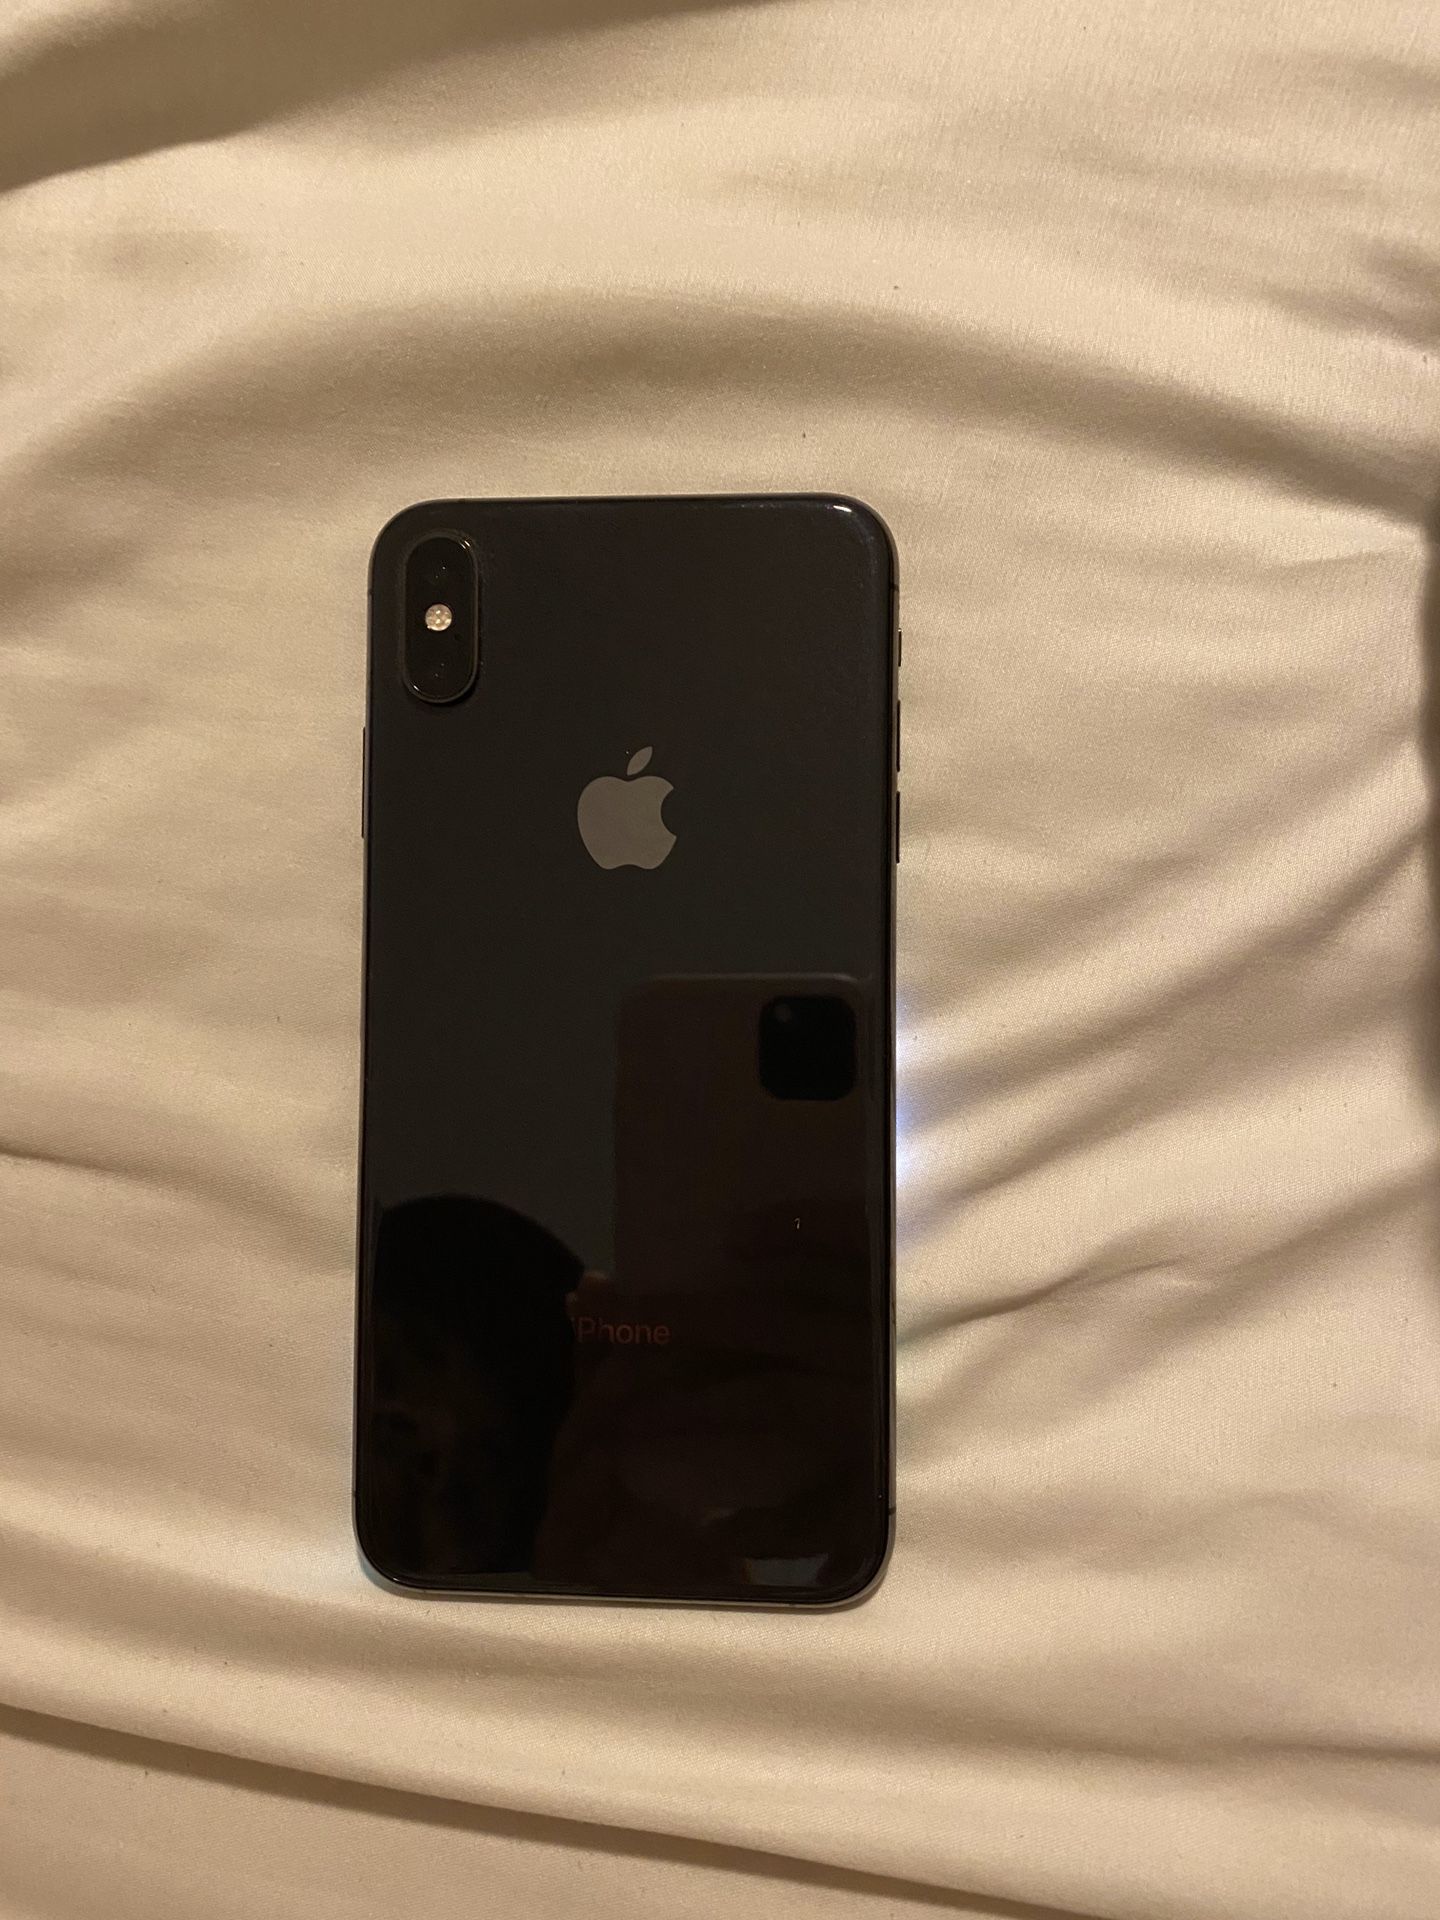 iPhone XS Max AT&T 256GB Space gray $670